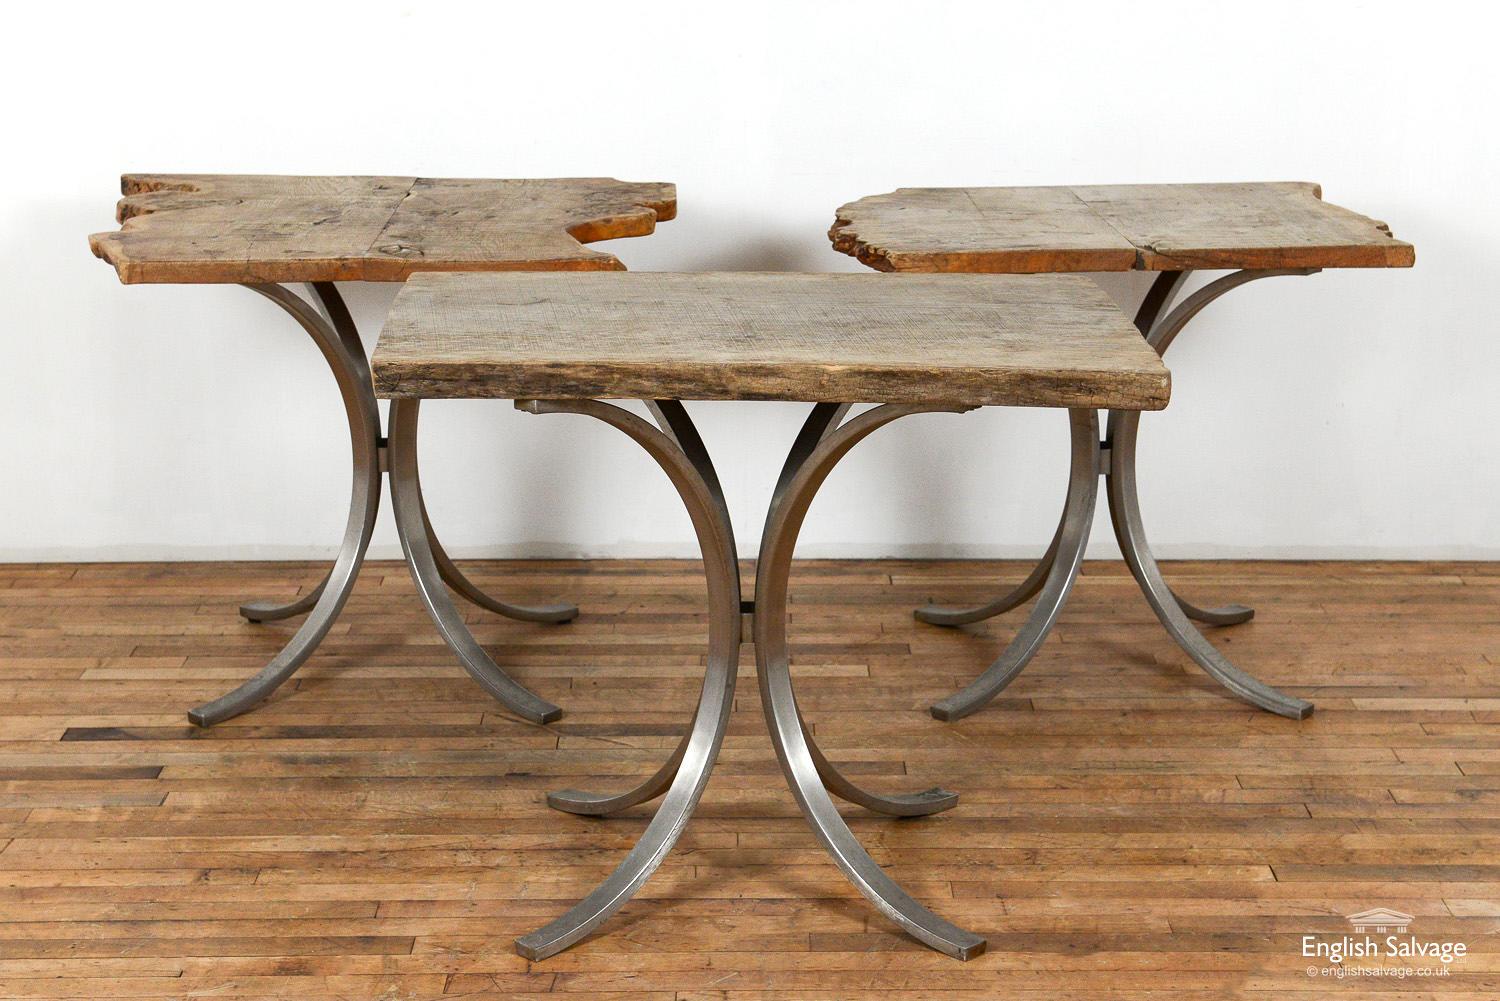 Reclaimed natural wavey edge oak top tables on brushed steel bases. Nicely weathered tops with plenty of character.